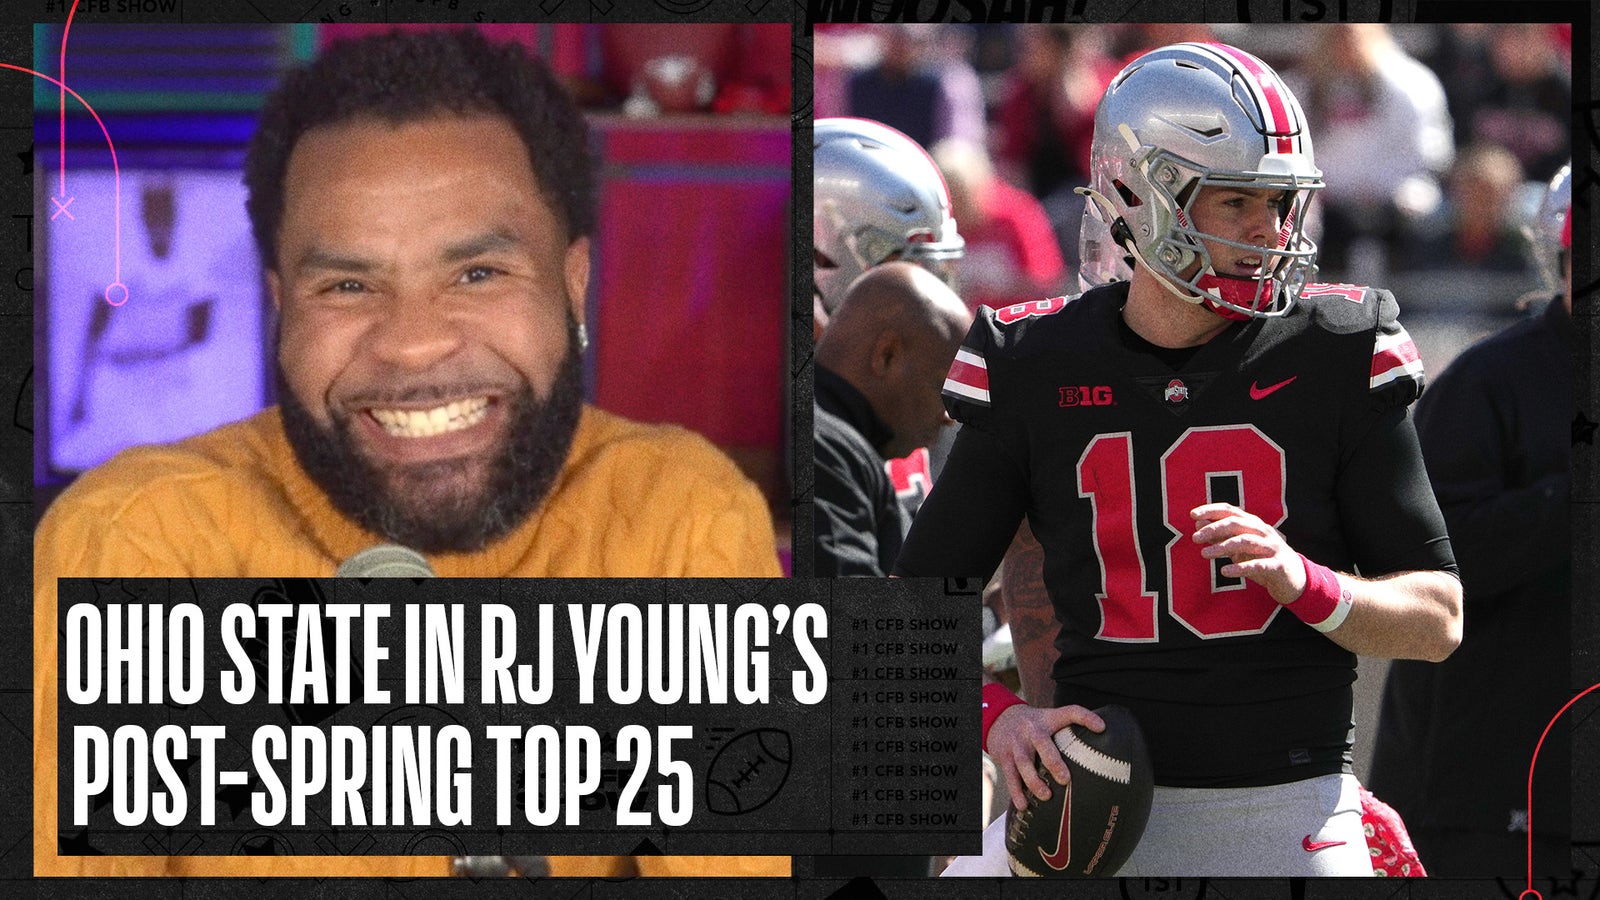 Ohio State, Texas & Michigan in RJ Young’s post-spring top 25 